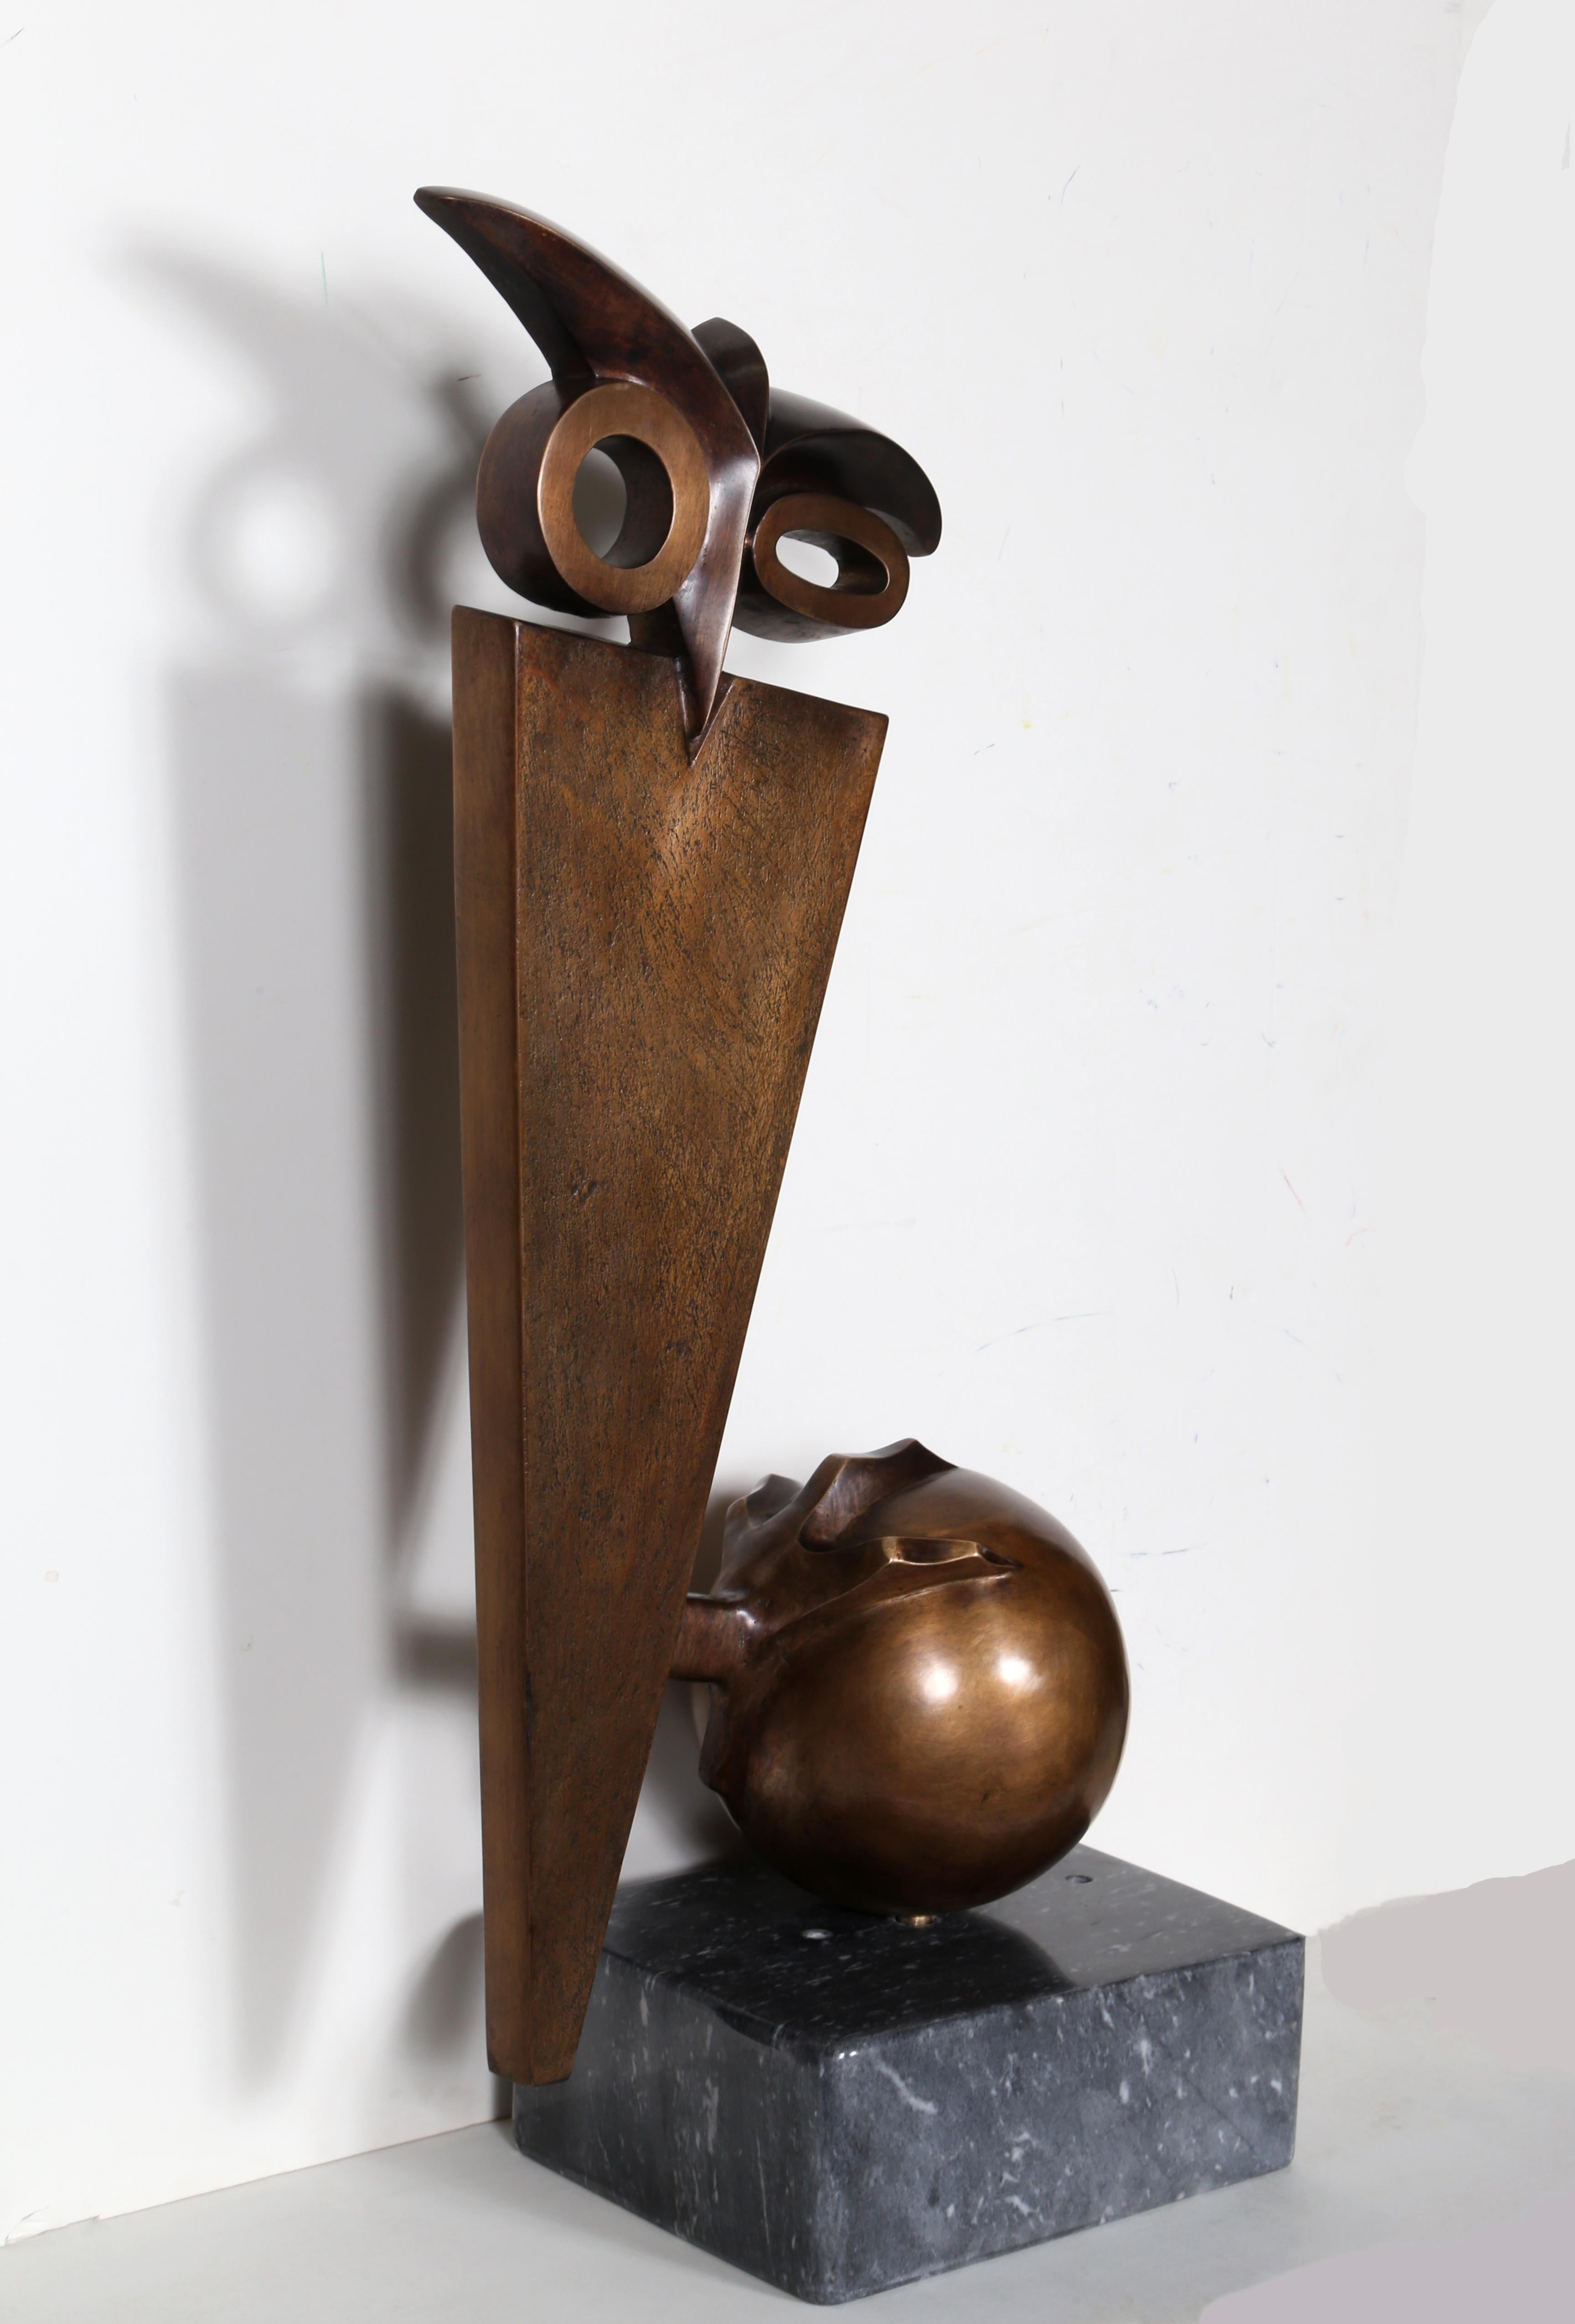 Owl Perched on Ball, Modern Bronze by Antonovici 1957 For Sale 1